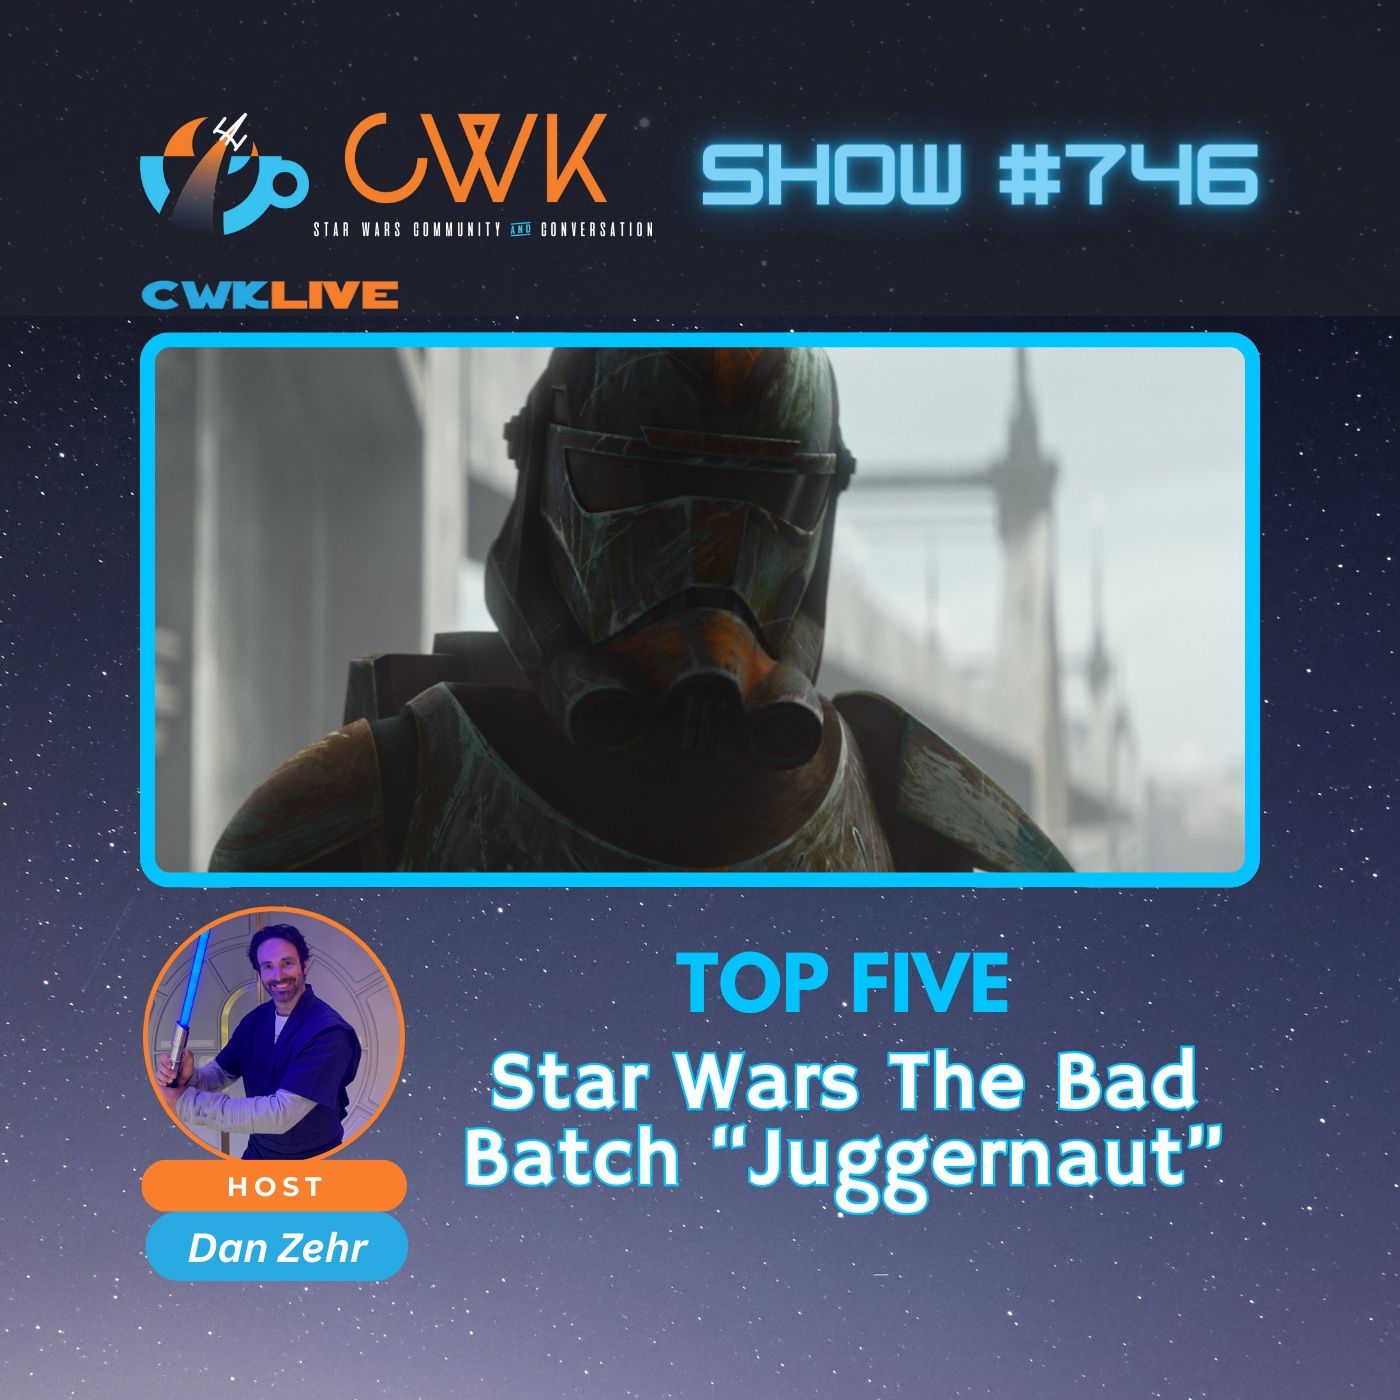 CWK Show #746 LIVE: Top Five Moments from The Bad Batch ”Juggernaut”